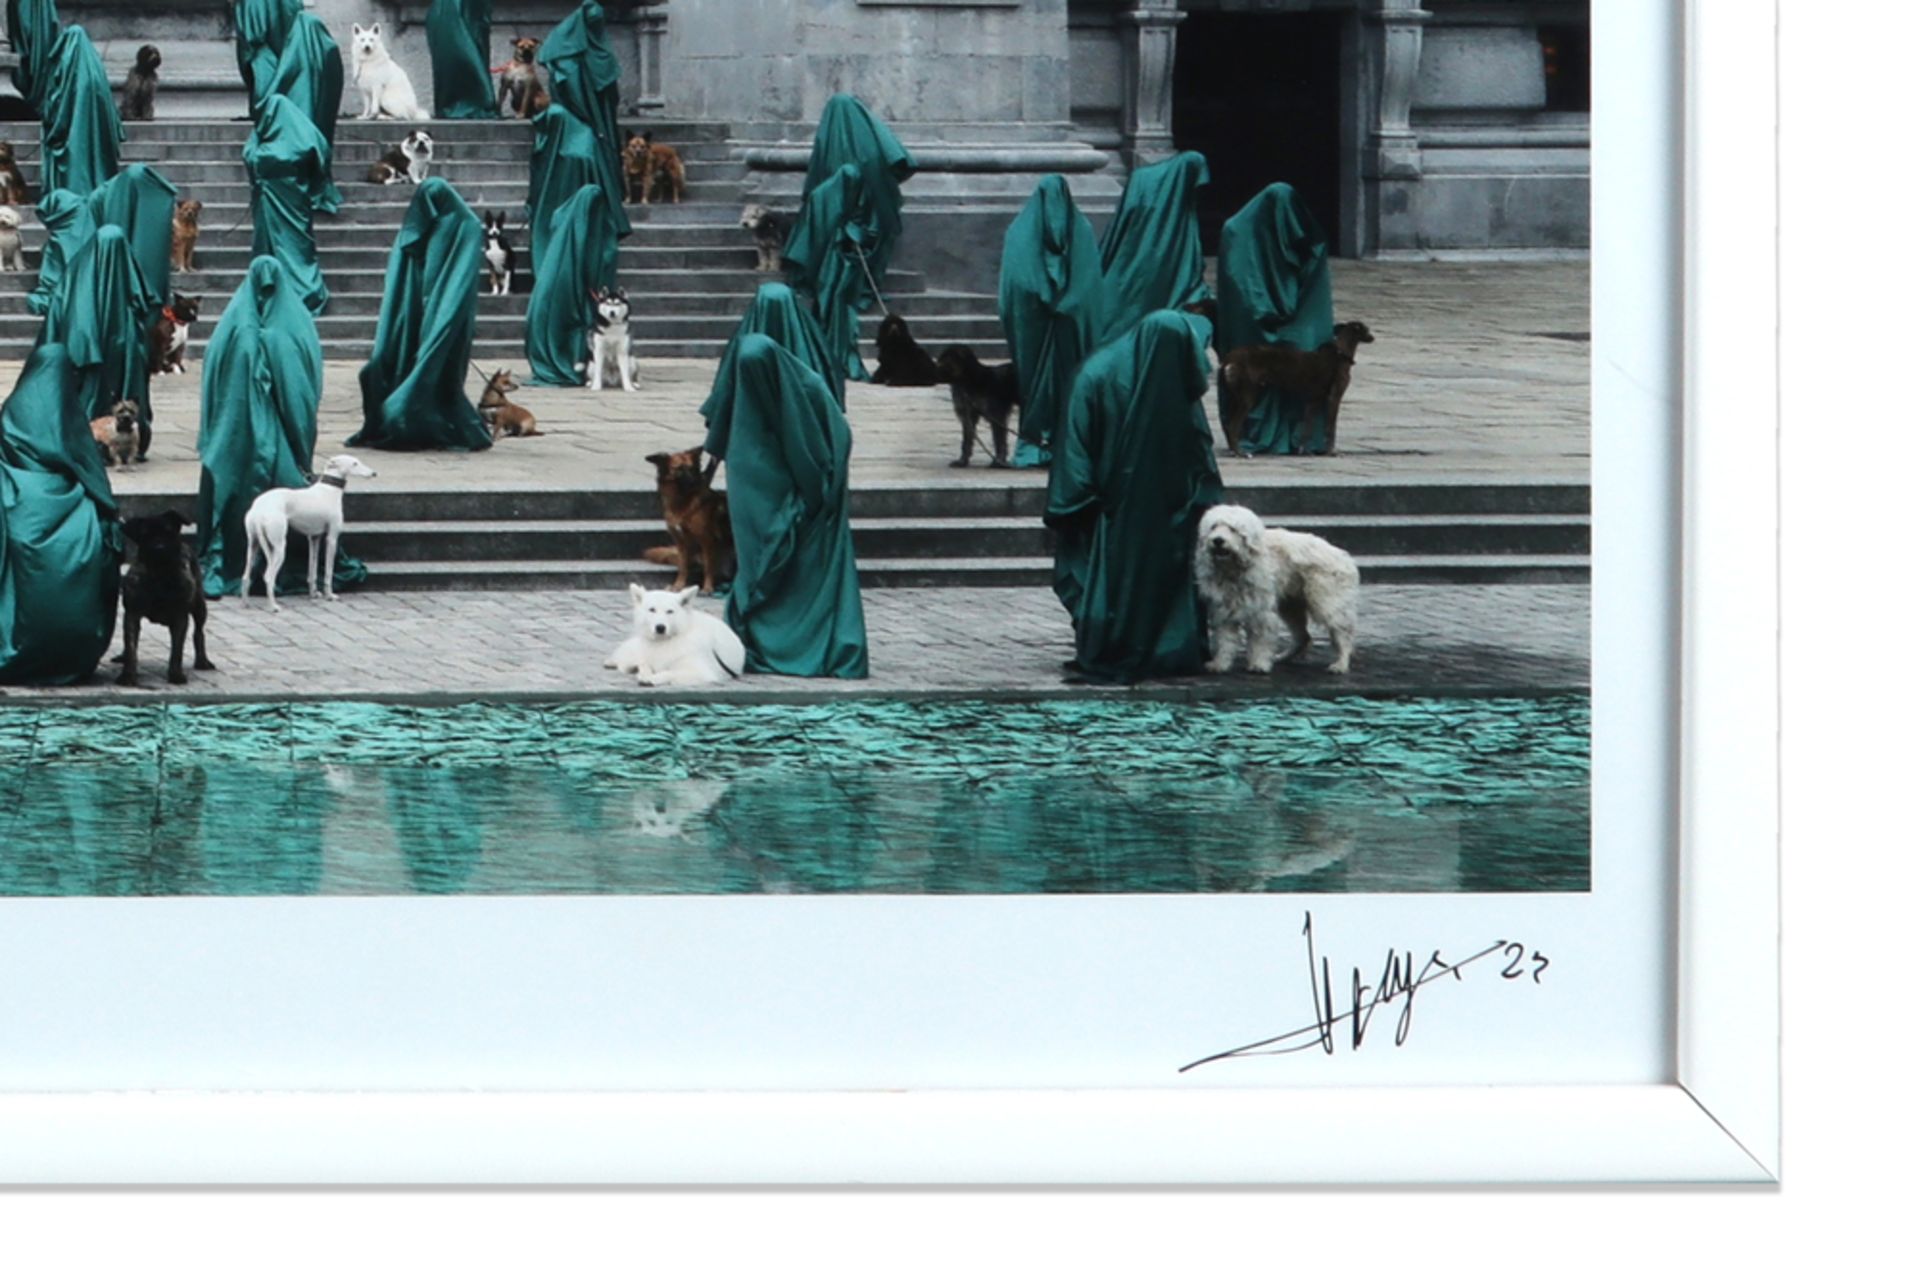 Vincent Lagrange photoprint in colors made in honor of 'The World Animals Day's dated (20)23 || - Bild 2 aus 3